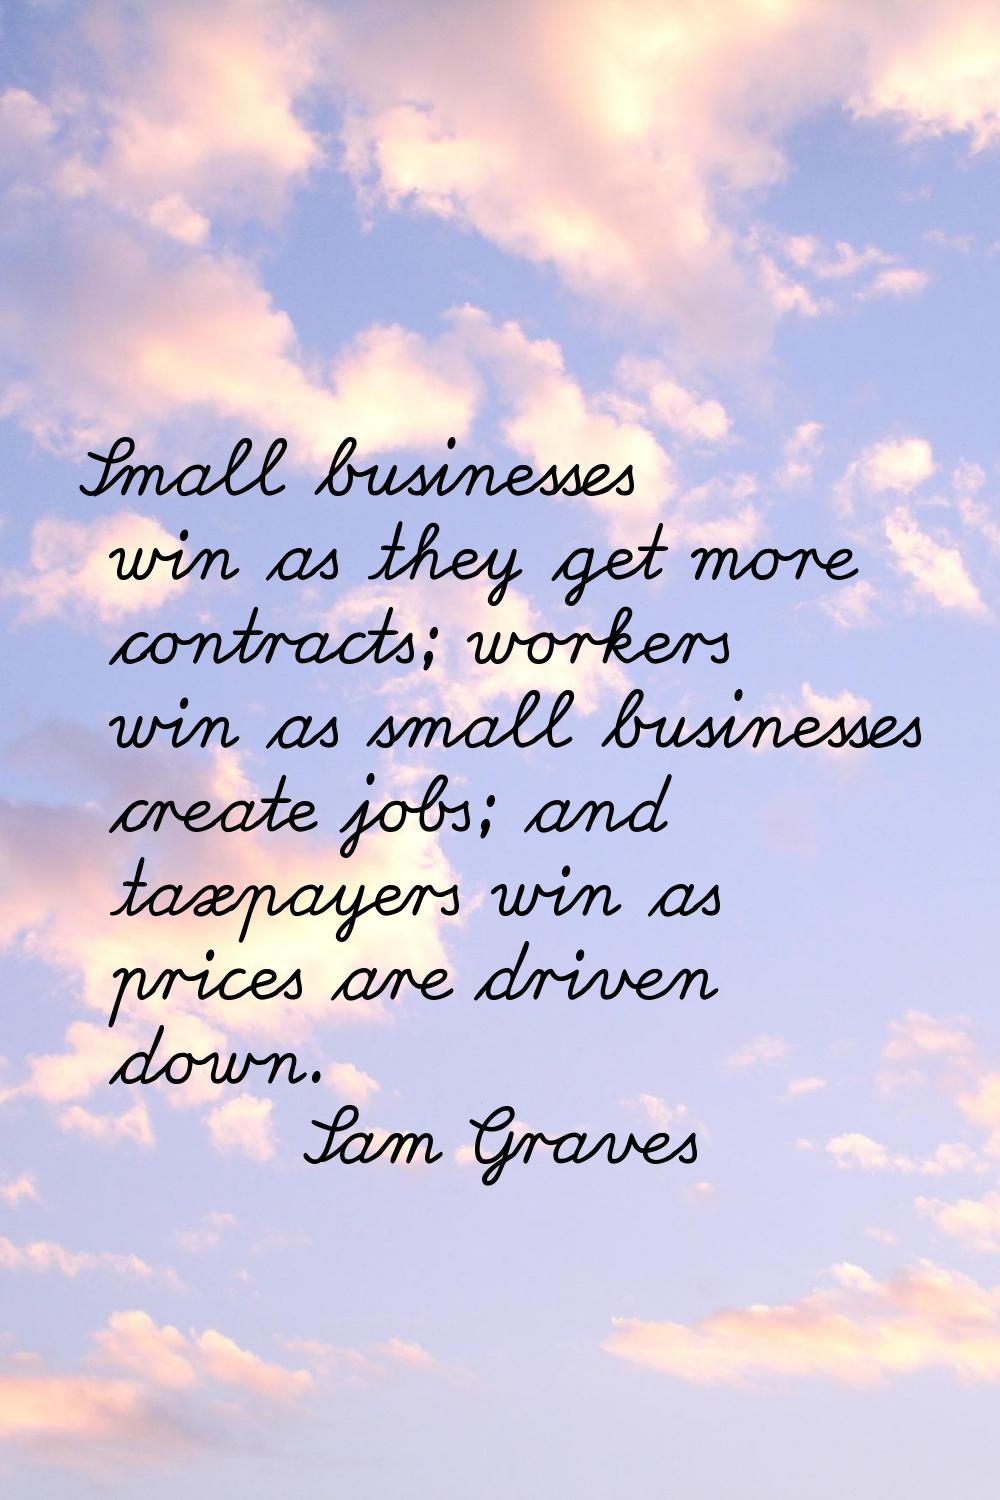 Small businesses win as they get more contracts; workers win as small businesses create jobs; and t